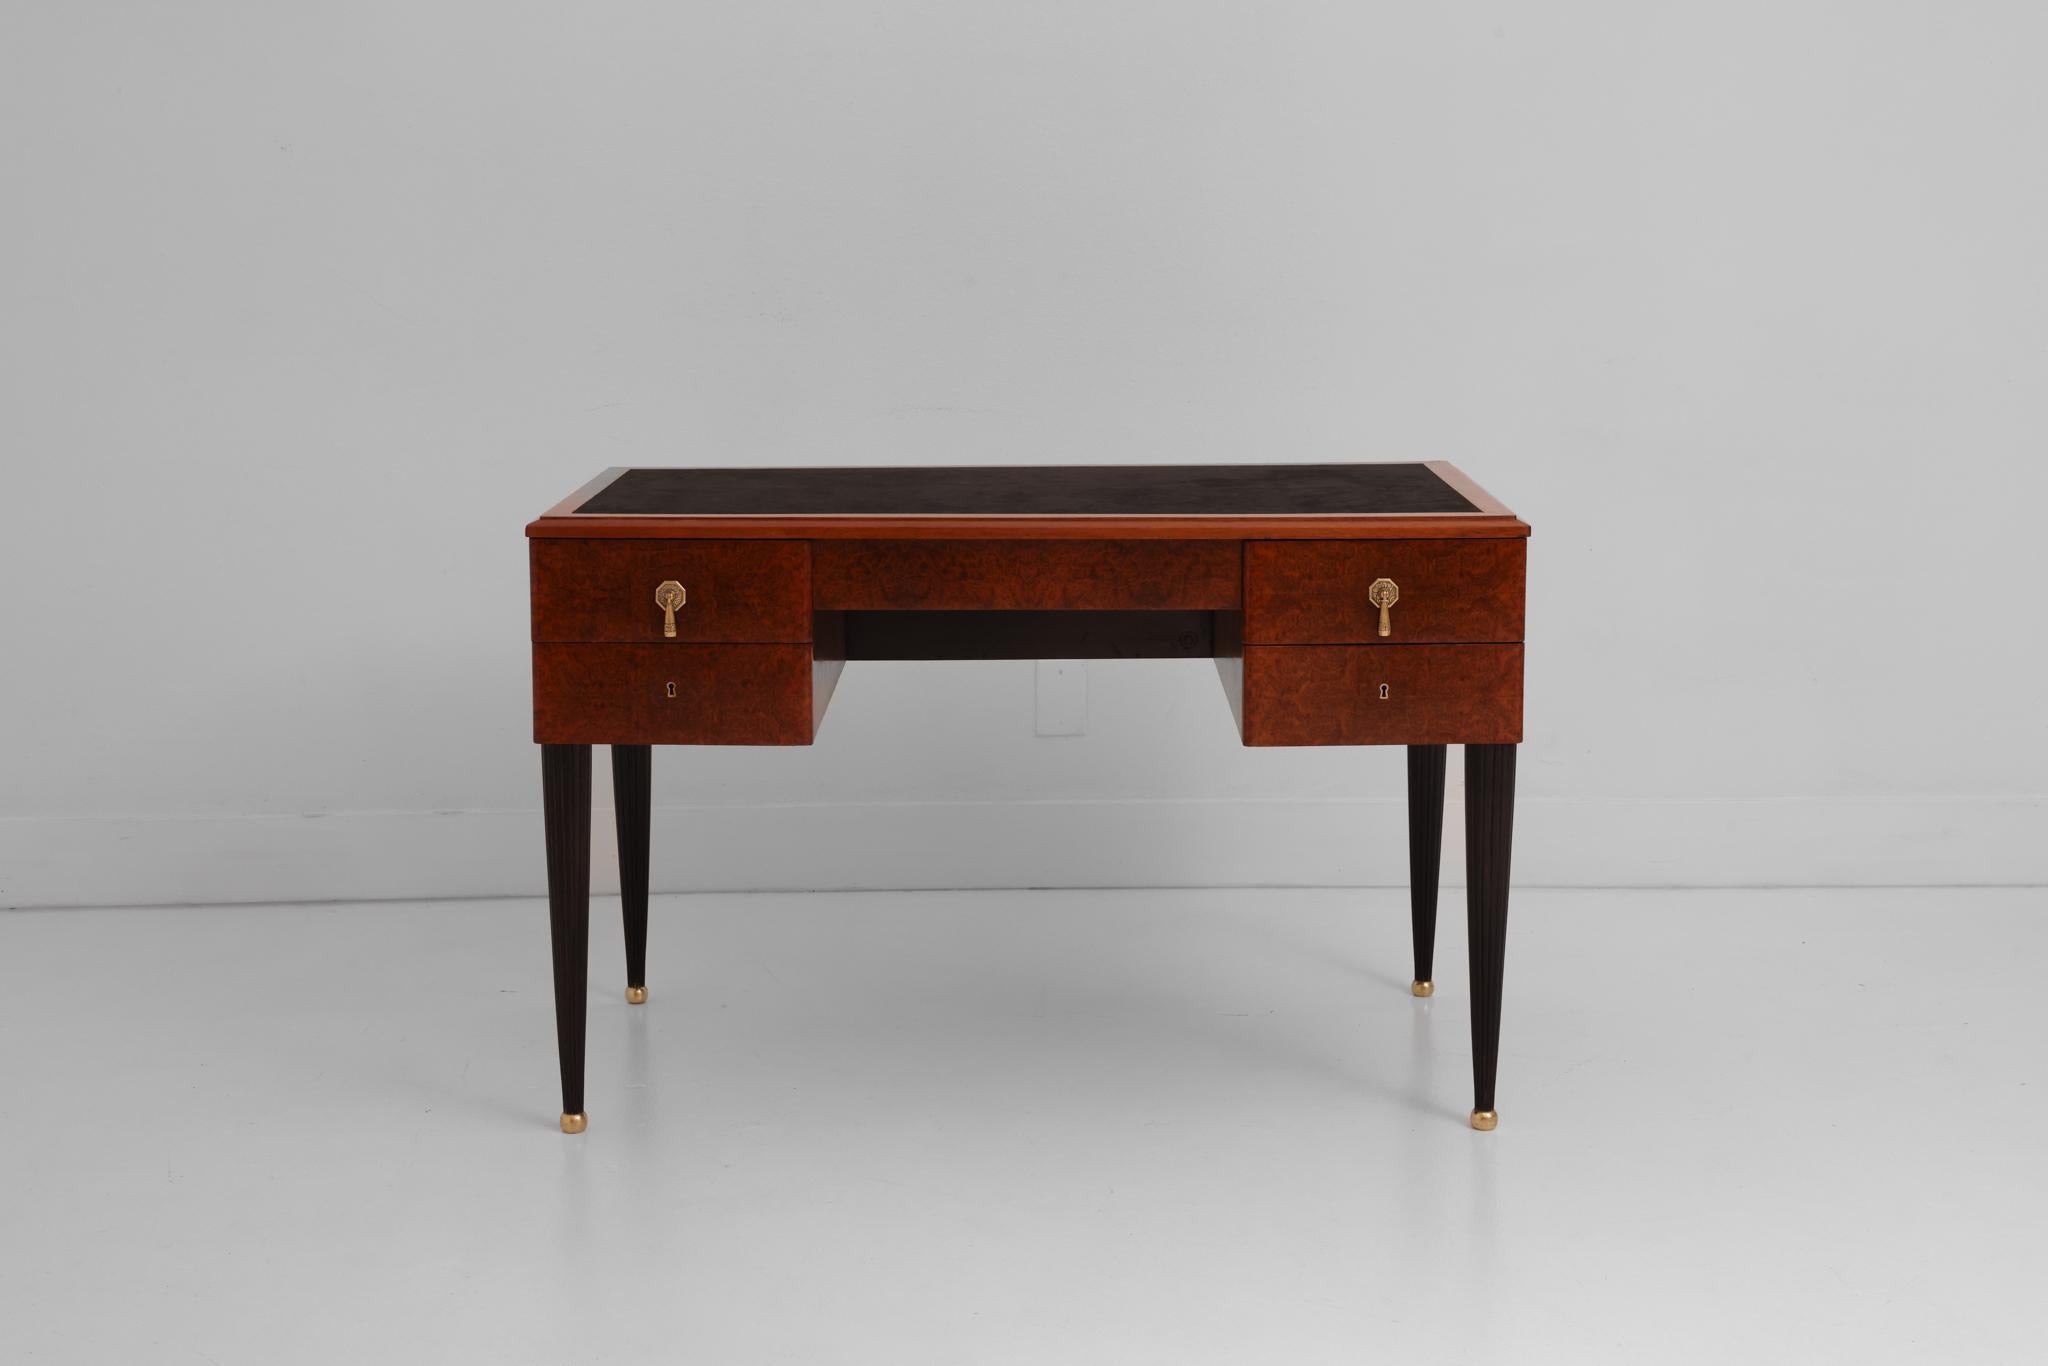 This fine Art Deco desk is a true gem. The desk is veneered in a warm burled wood. The fluted legs have been lacquered black and are finished with a round brass sabot. The stylish brass pulls are decorated in a classic Art Deco motif. The top of the